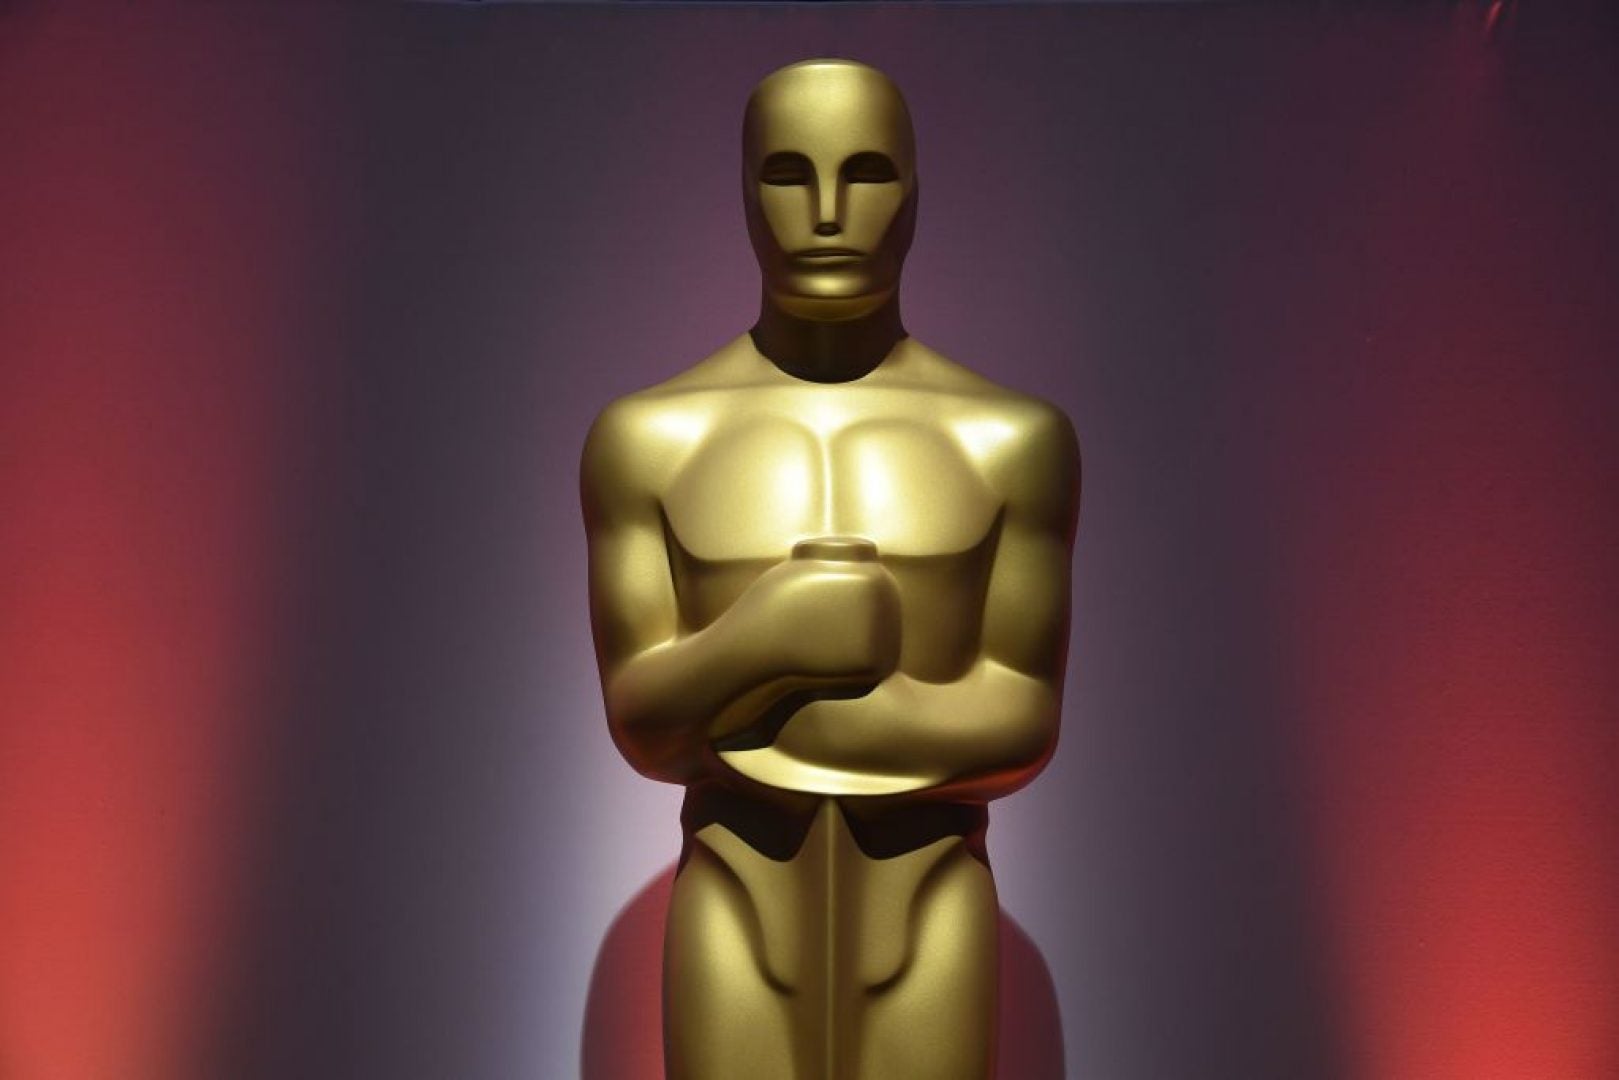 Doing The  Work: The Academy of Motion Picture Arts and Sciences Six Years After #OscarsSoWhite